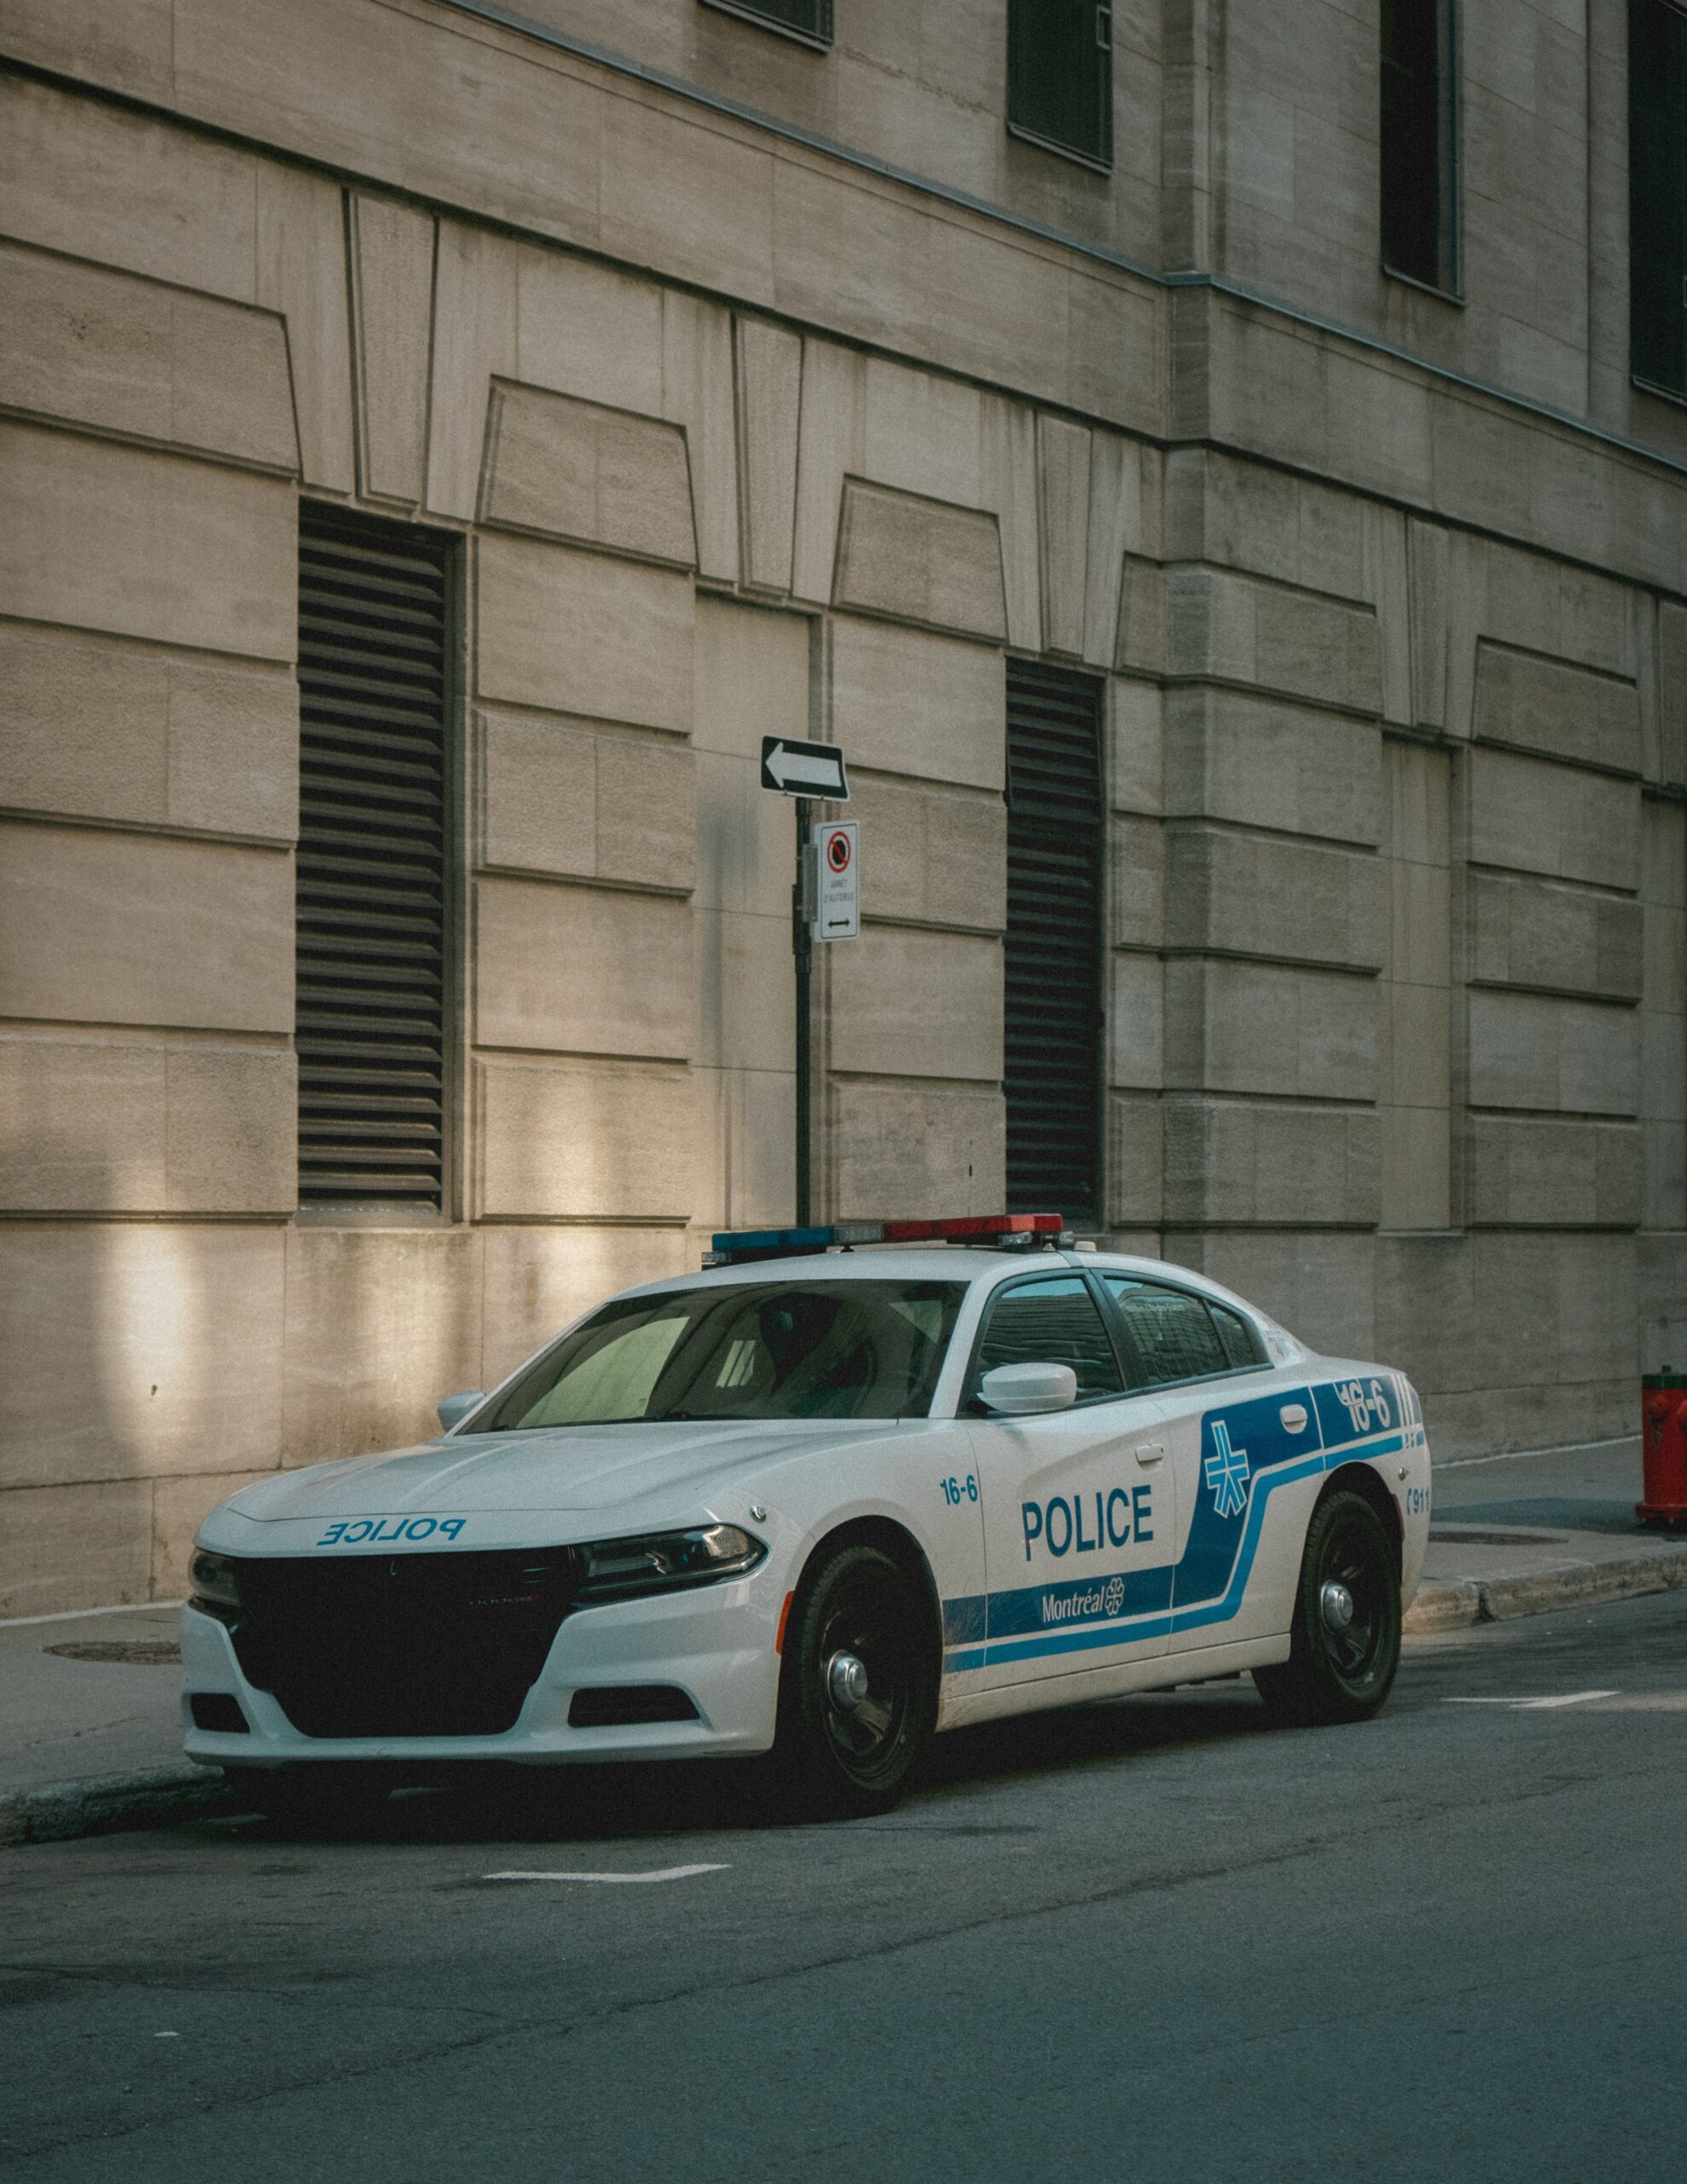 Picture of a police car